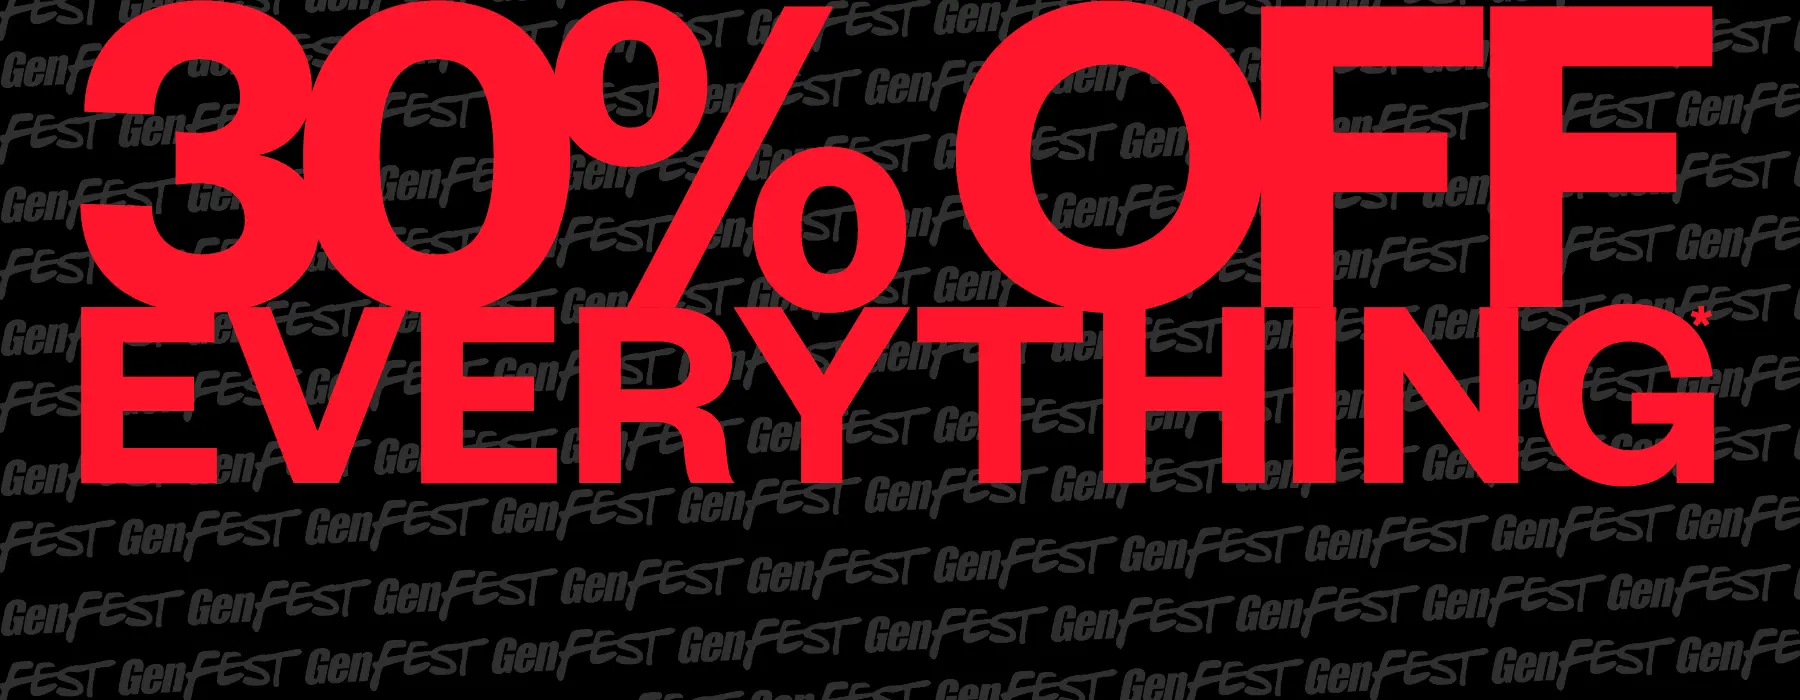 General Pants Cyber week 30% OFF everything including sale & full price styles